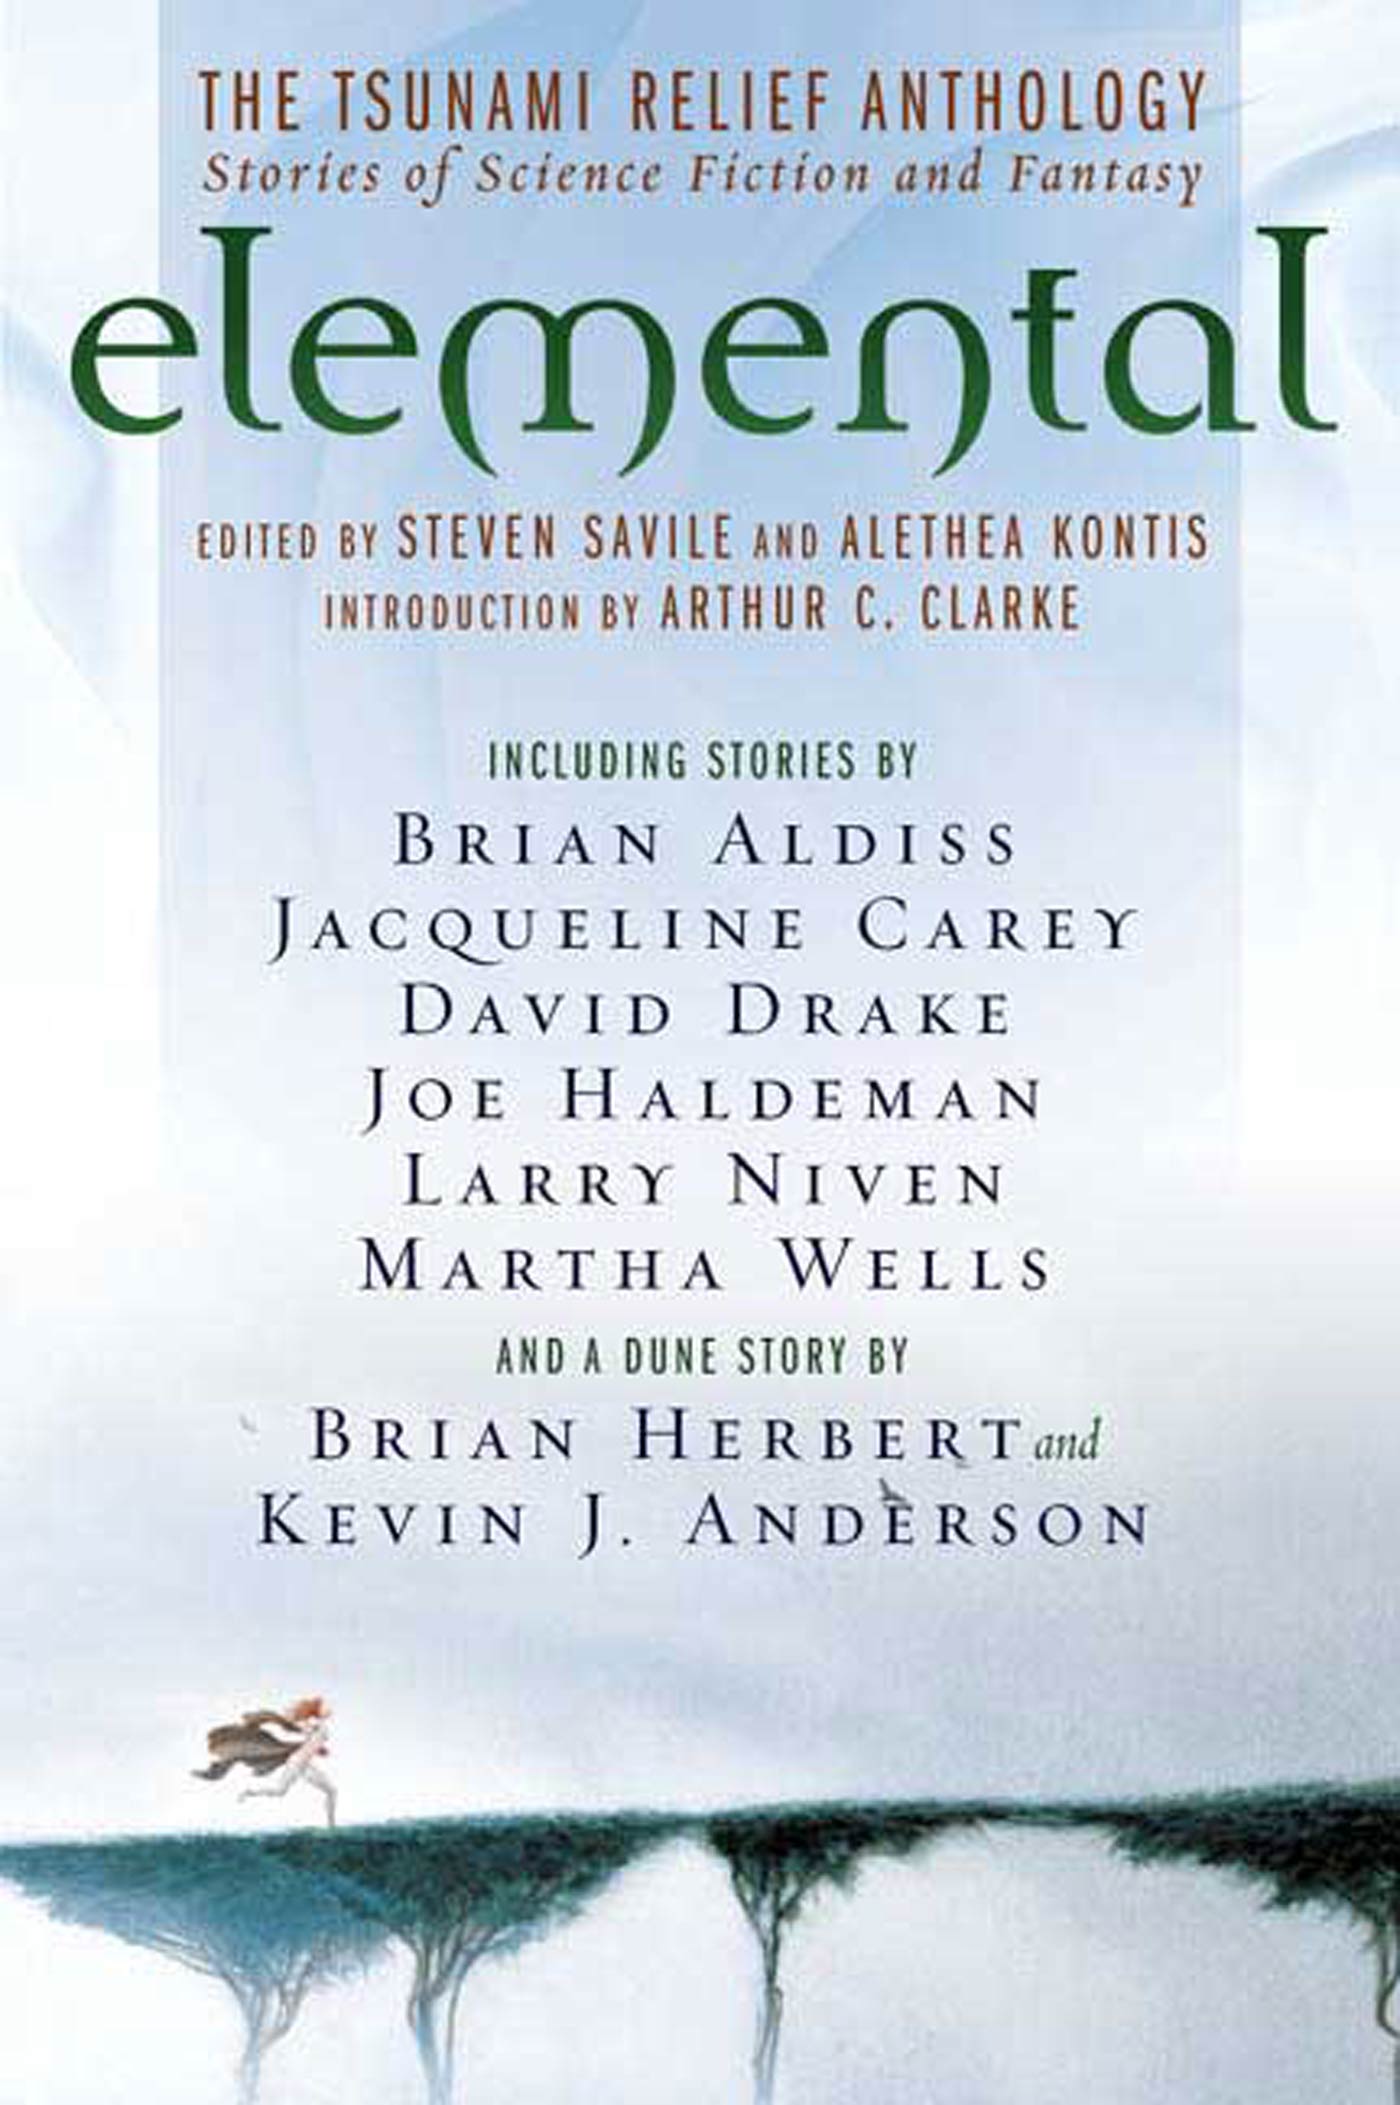 Elemental: The Tsunami  Relief Anthology : Stories of Science Fiction and Fantasy by Steven Savile, Alethea Kontis